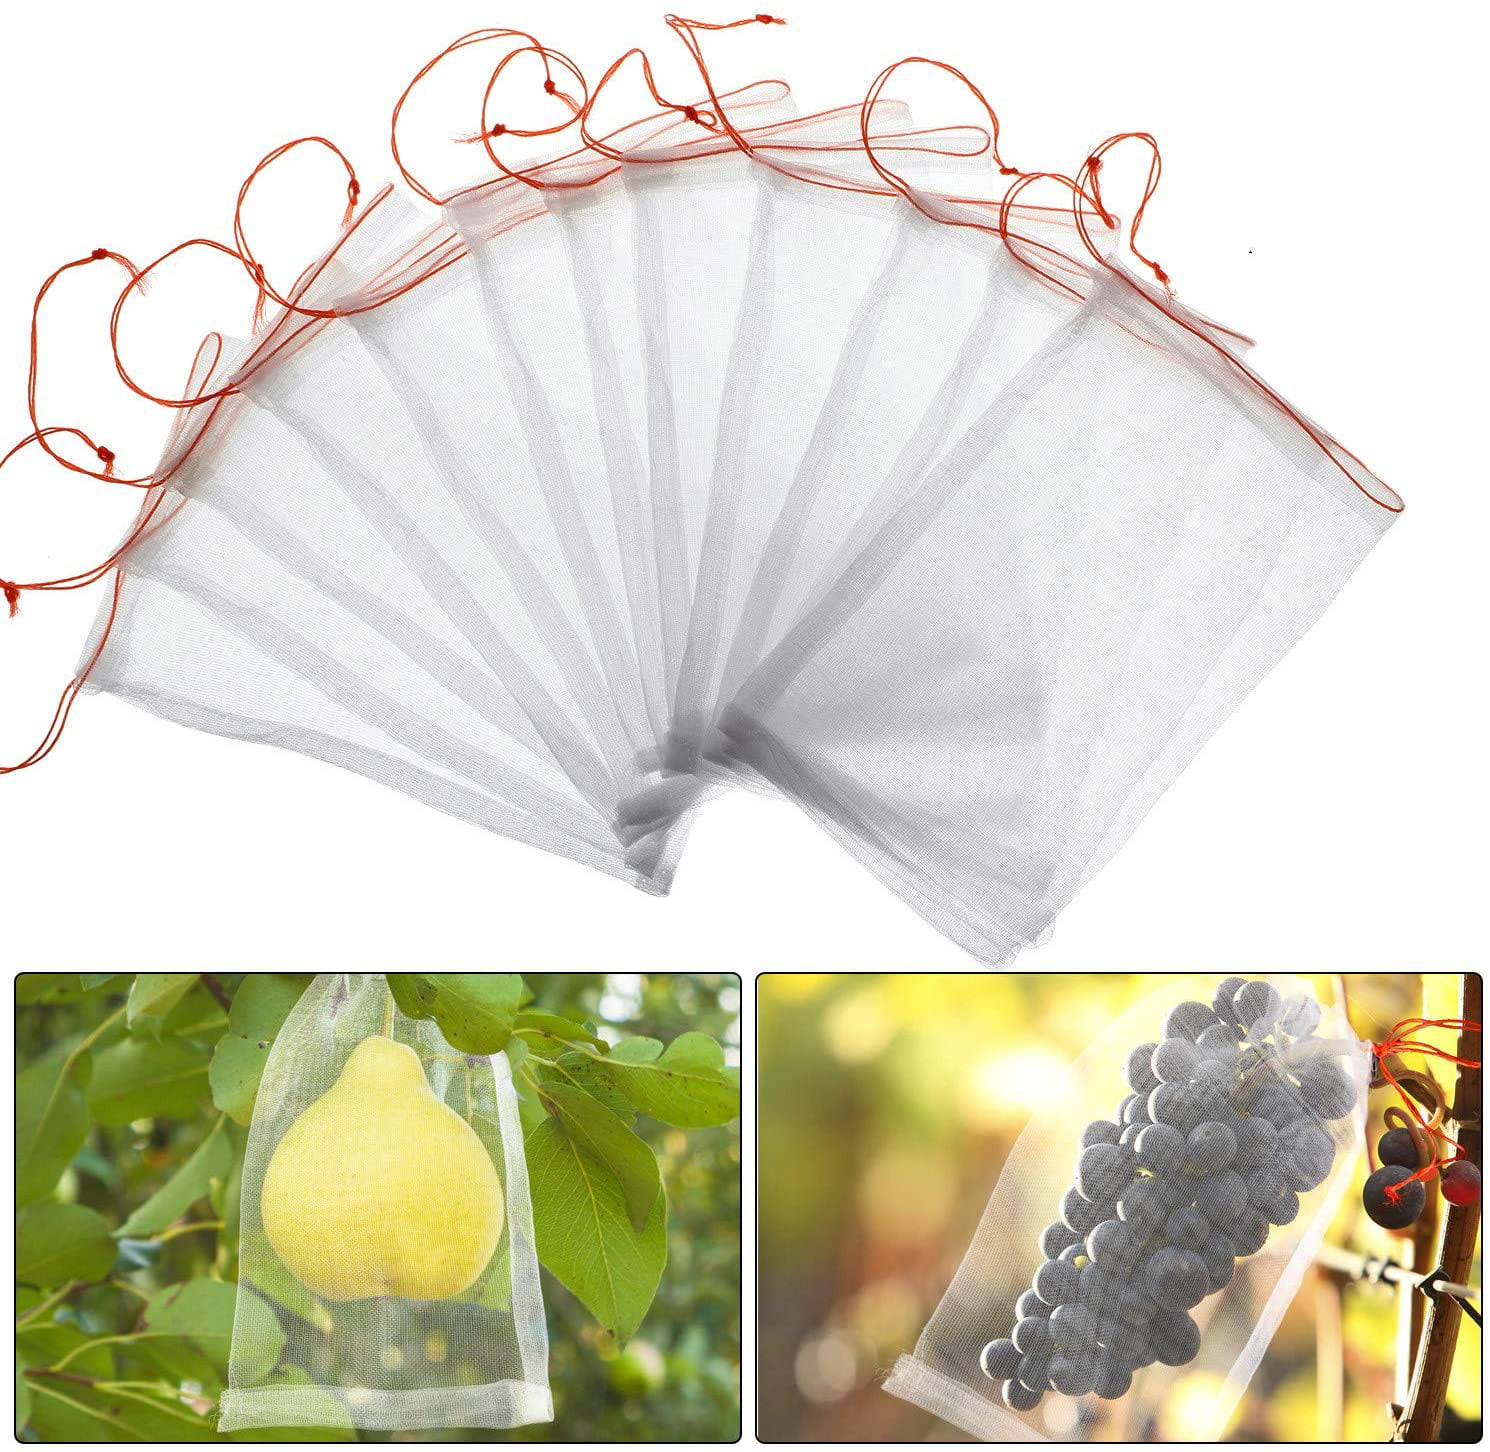 Alltripal 100 PCS Reusable Fabric Fruit Protection Bags Reusable Nylon Mesh Netting Barrier Bags for Apple Grape Mango Pear Fruit and Vegetable Against from Birds 7.87X9.84inch, 100pcs 